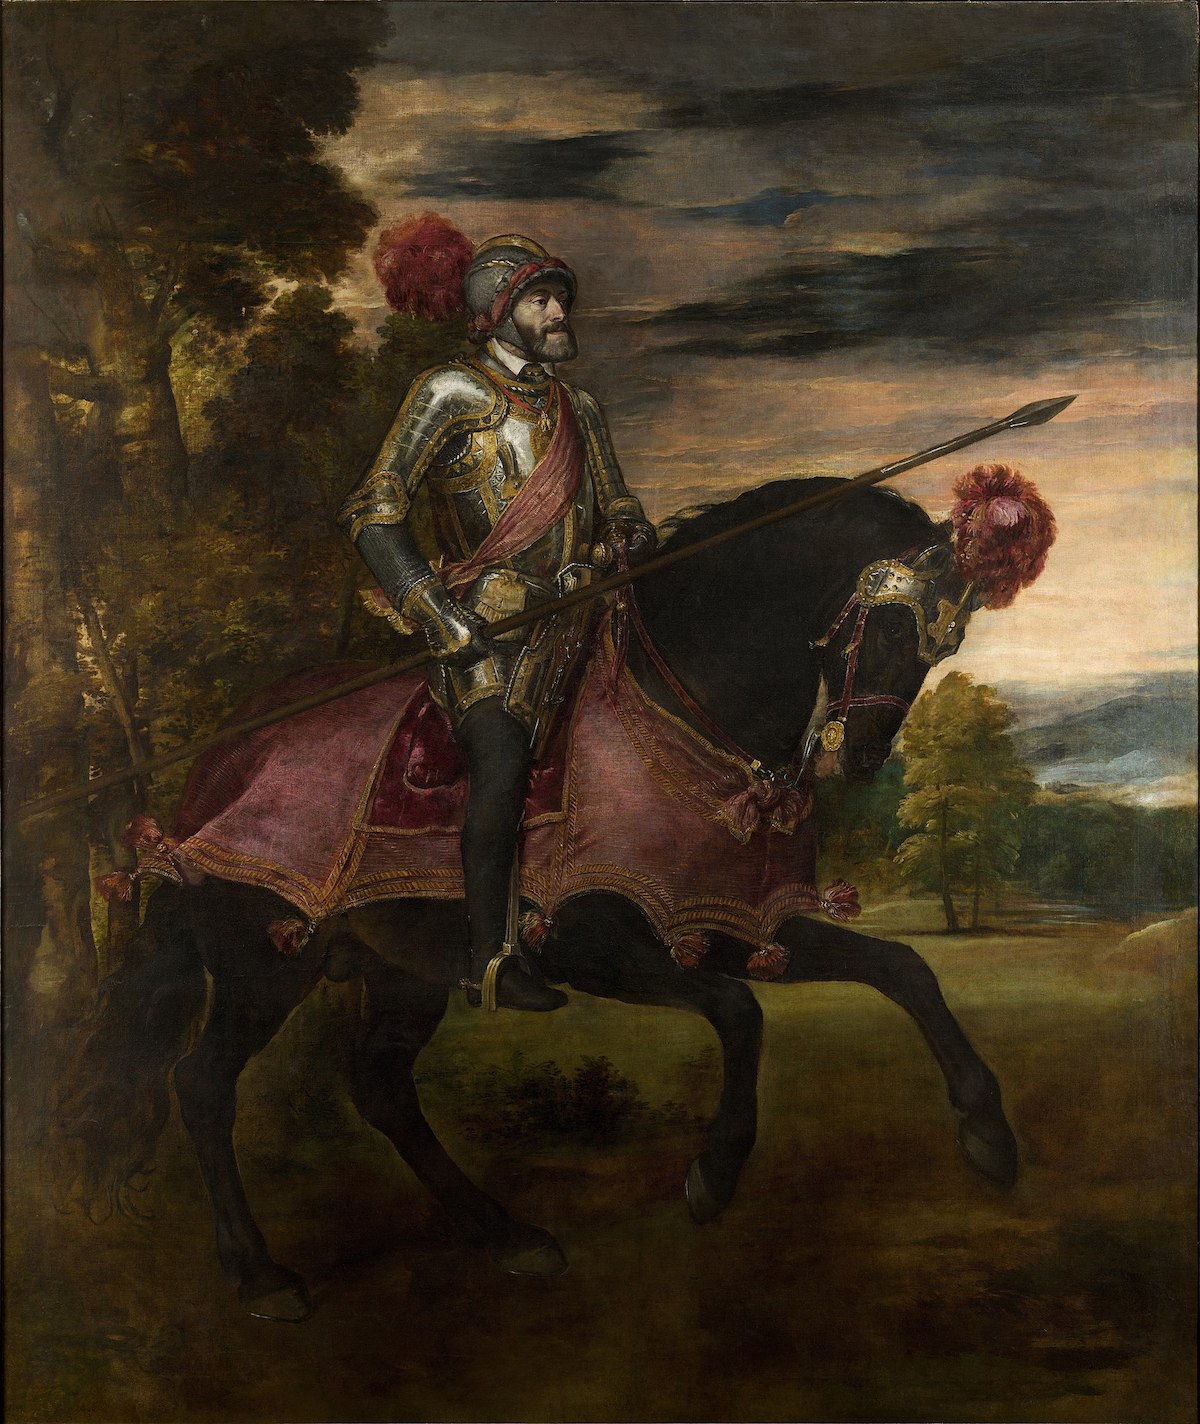 Oil on canvas painting of a king wearing a suit of armor on horseback.